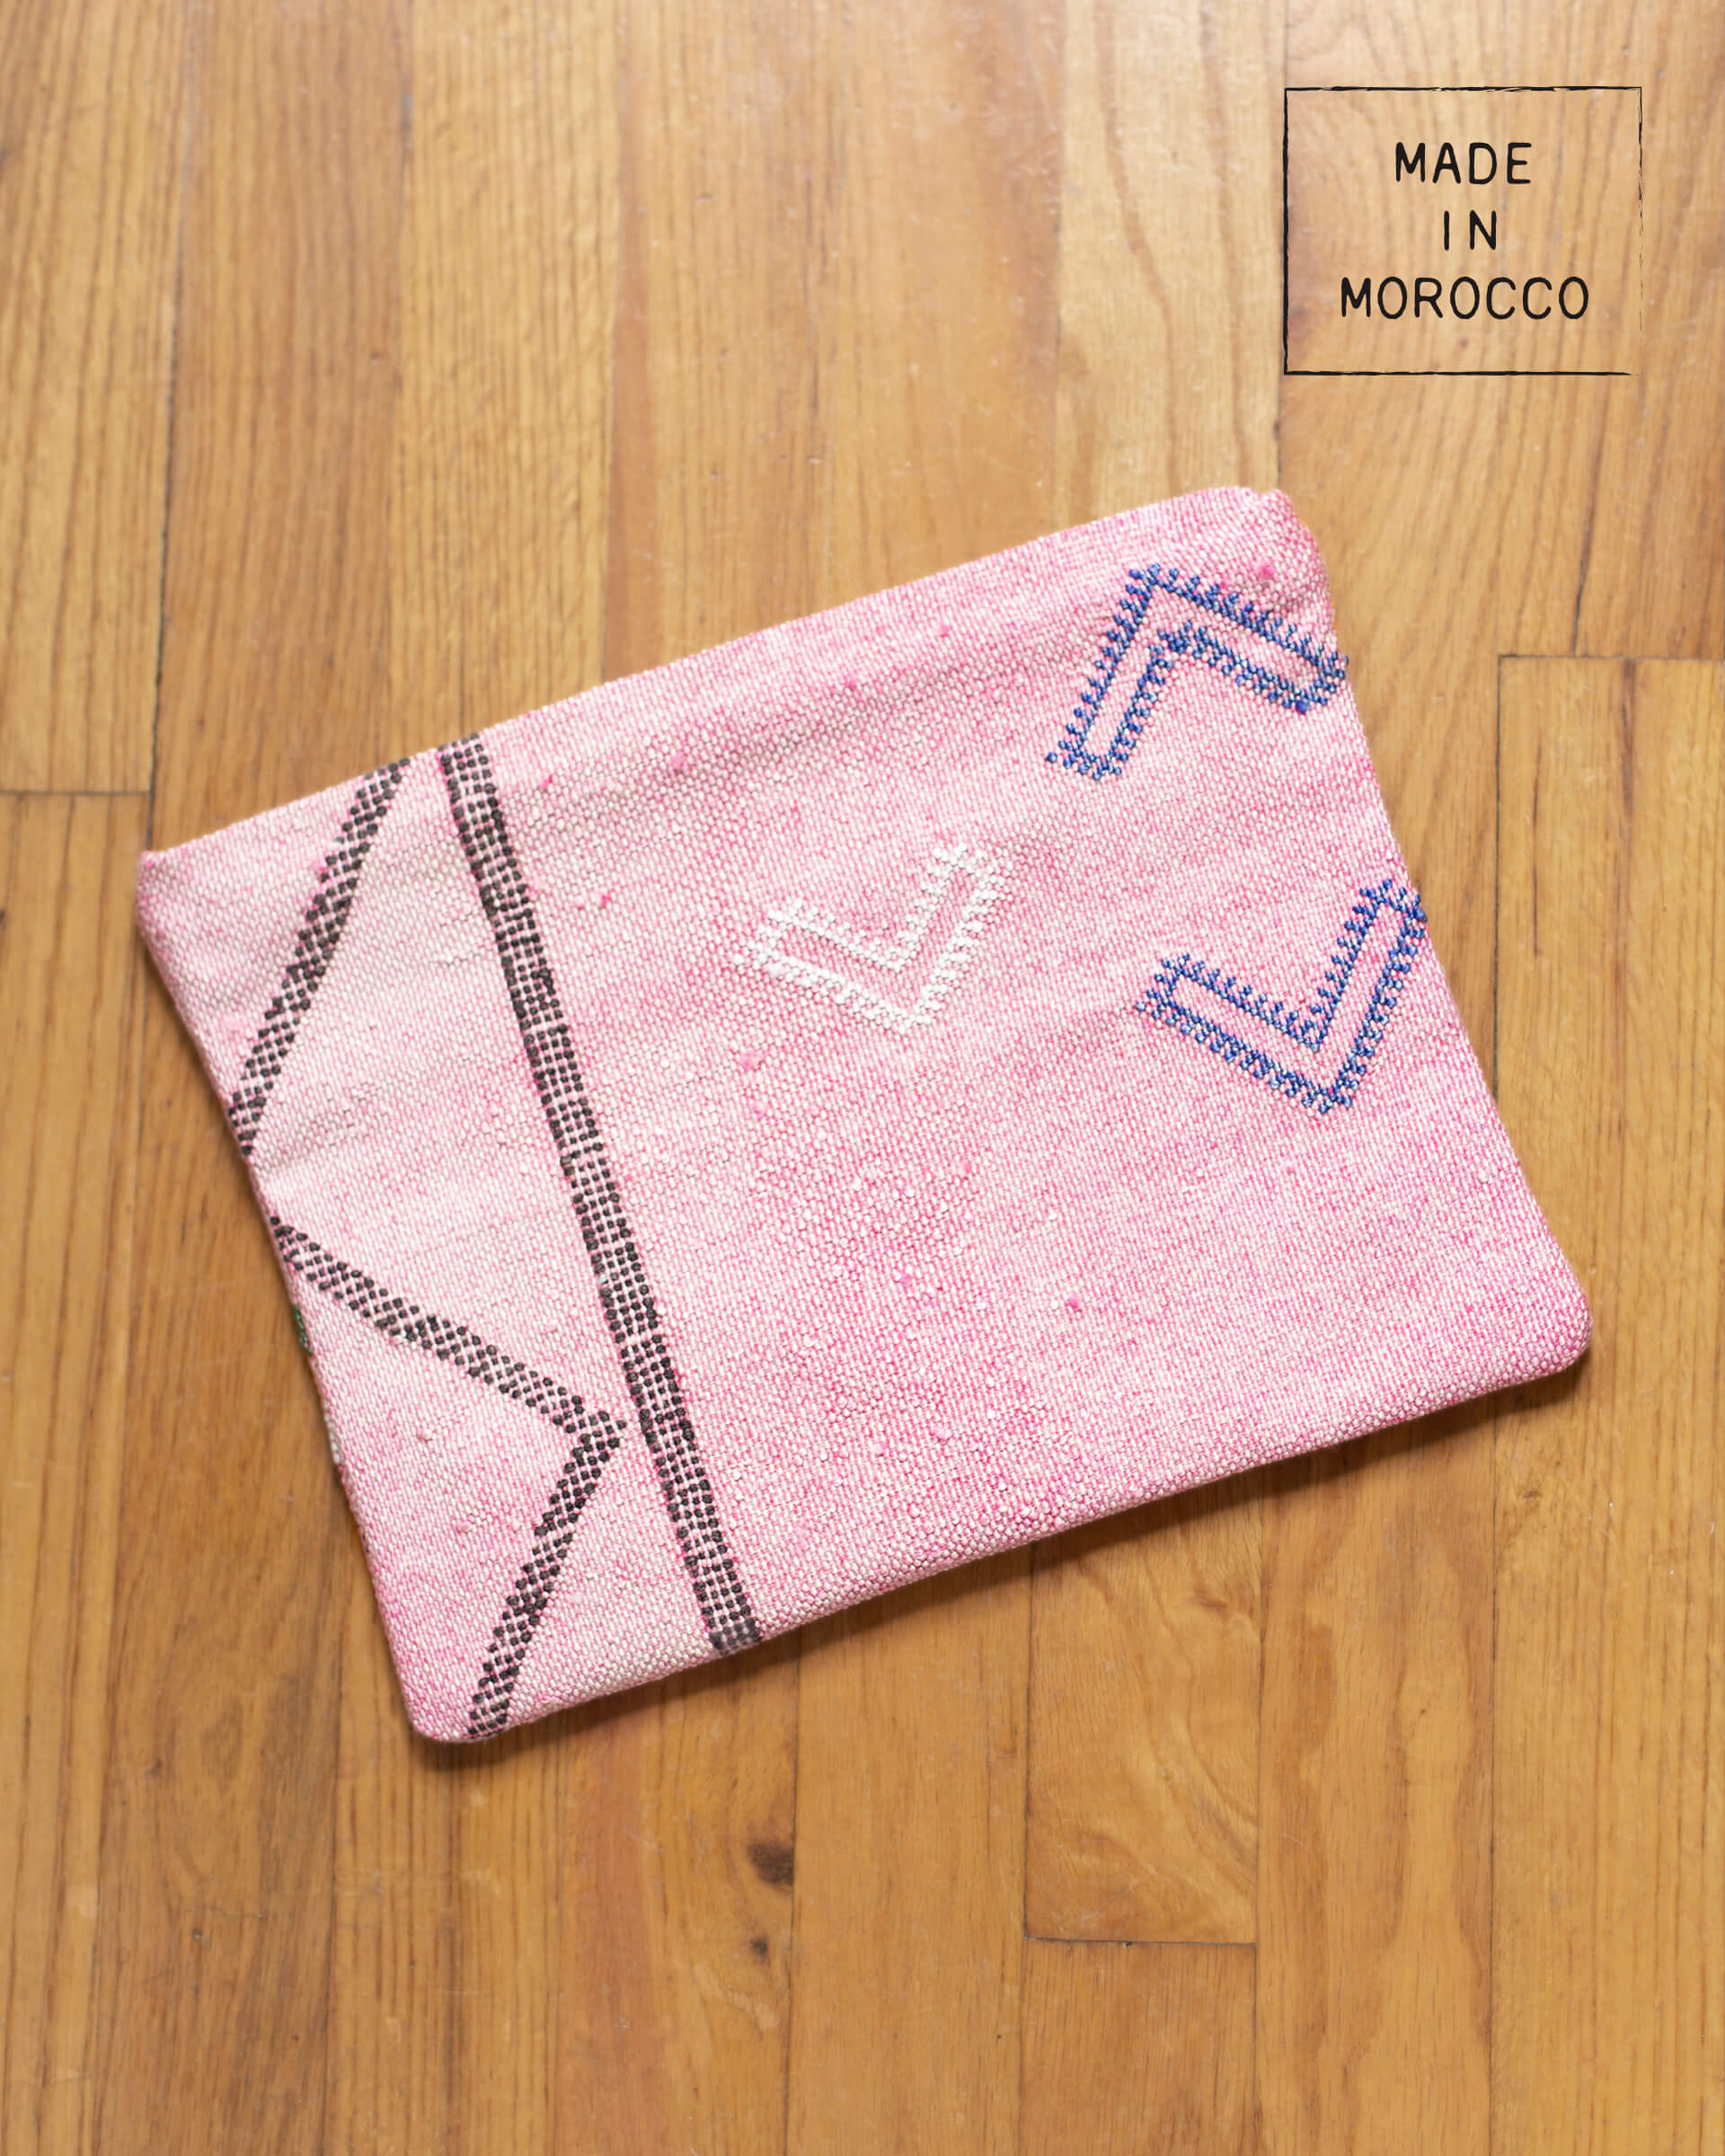 pink cactus silk clutch with design laying on brown wooden floor made in morocco